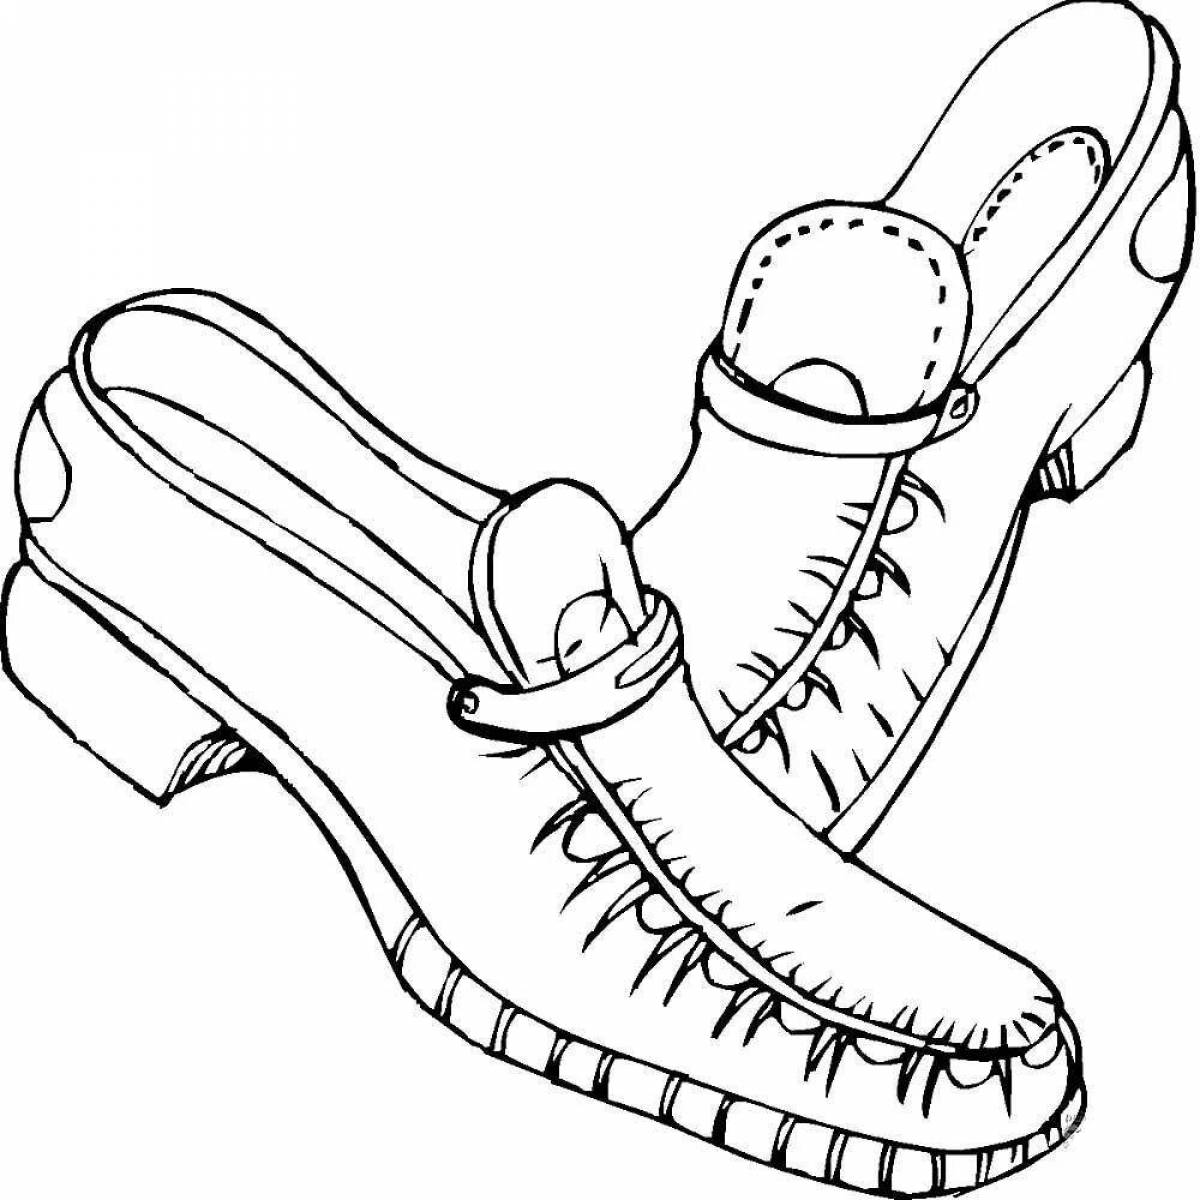 Coloring page nice shoes for kids